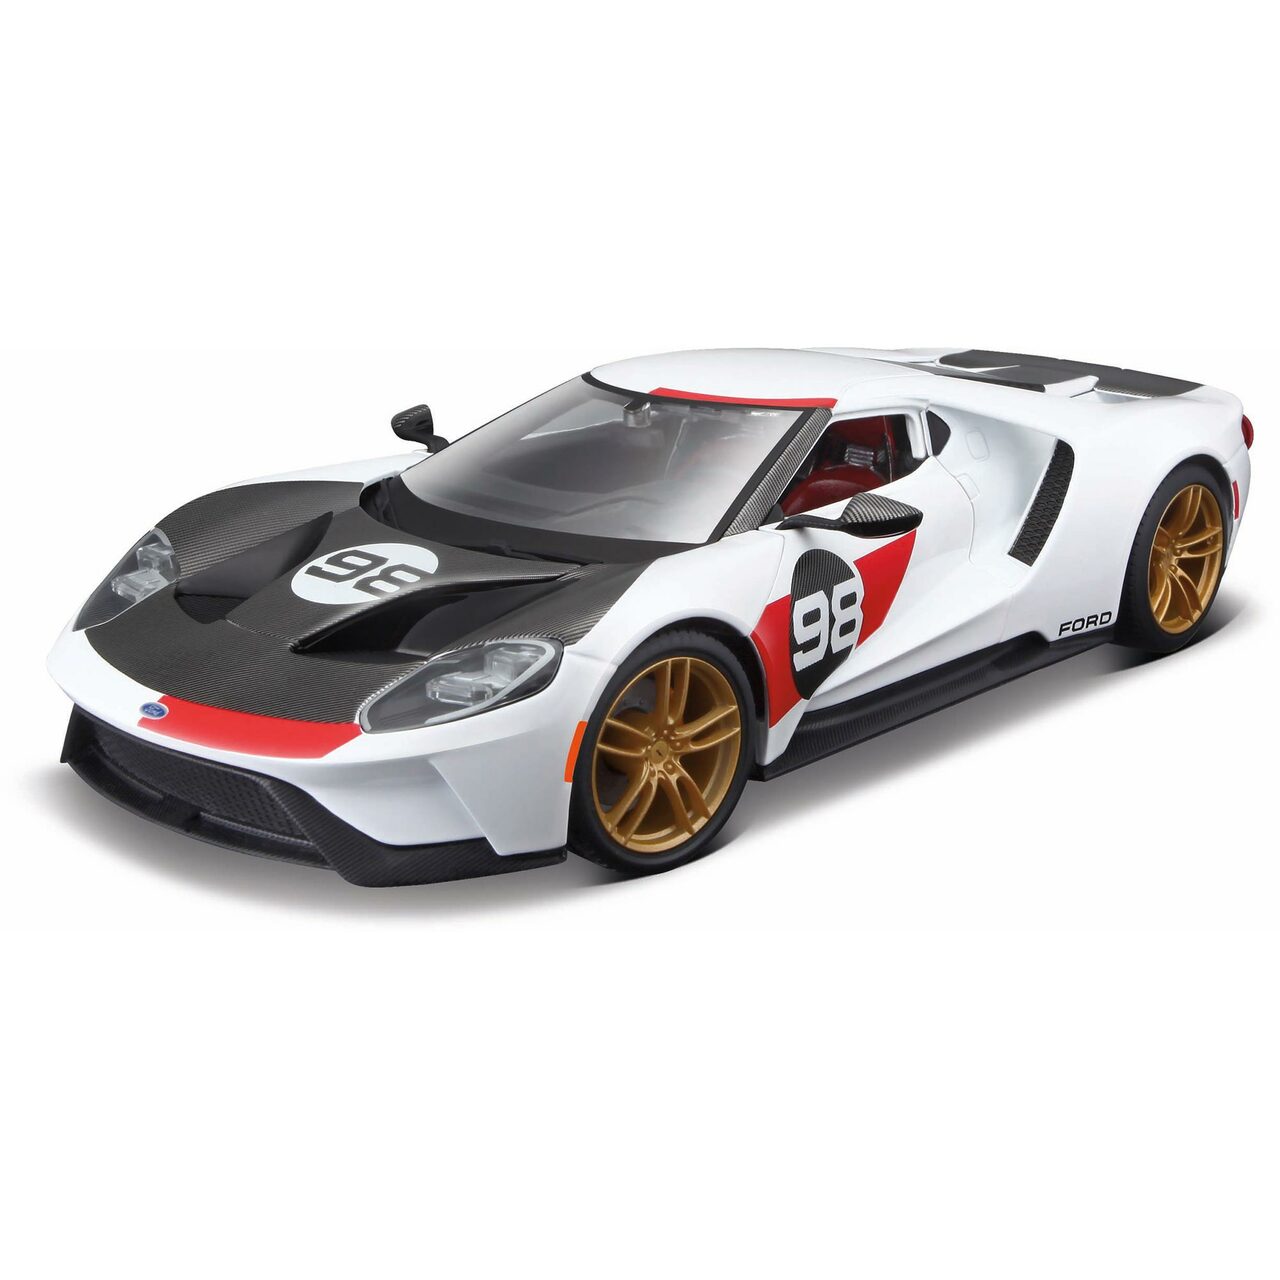 Игрушечная машинка Maisto Ford GT Heritage 2021, 1:18, белая 31390 maisto 1 24 ford 1967 ford mustang gt old edition simulation alloy car model collection ornaments